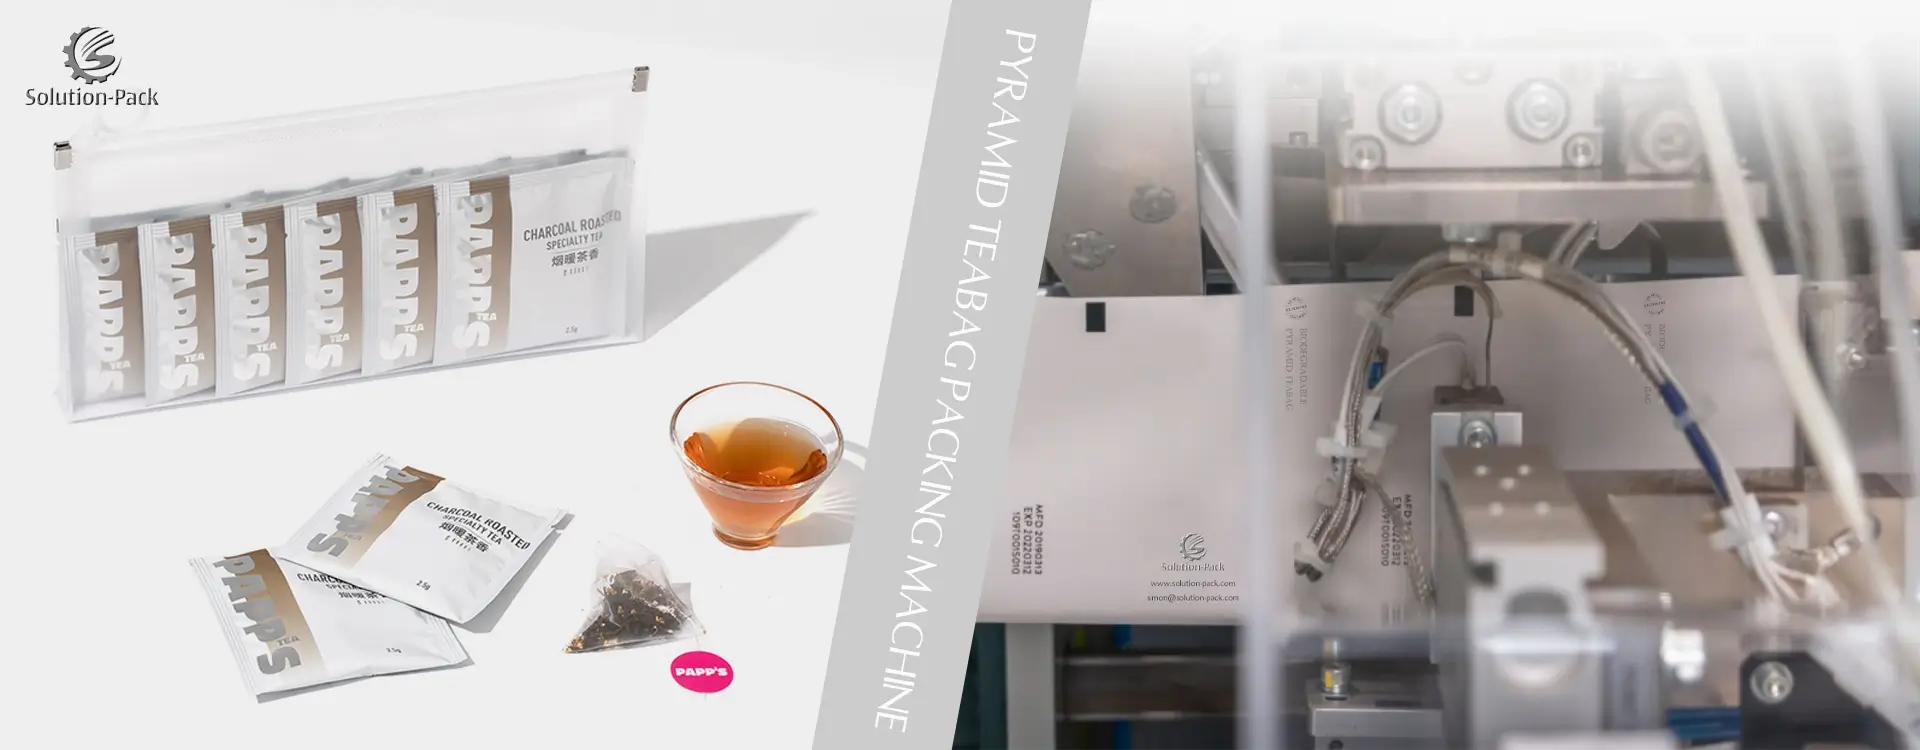 Pyramid Teabag Packaging Machine | Solution-Pack